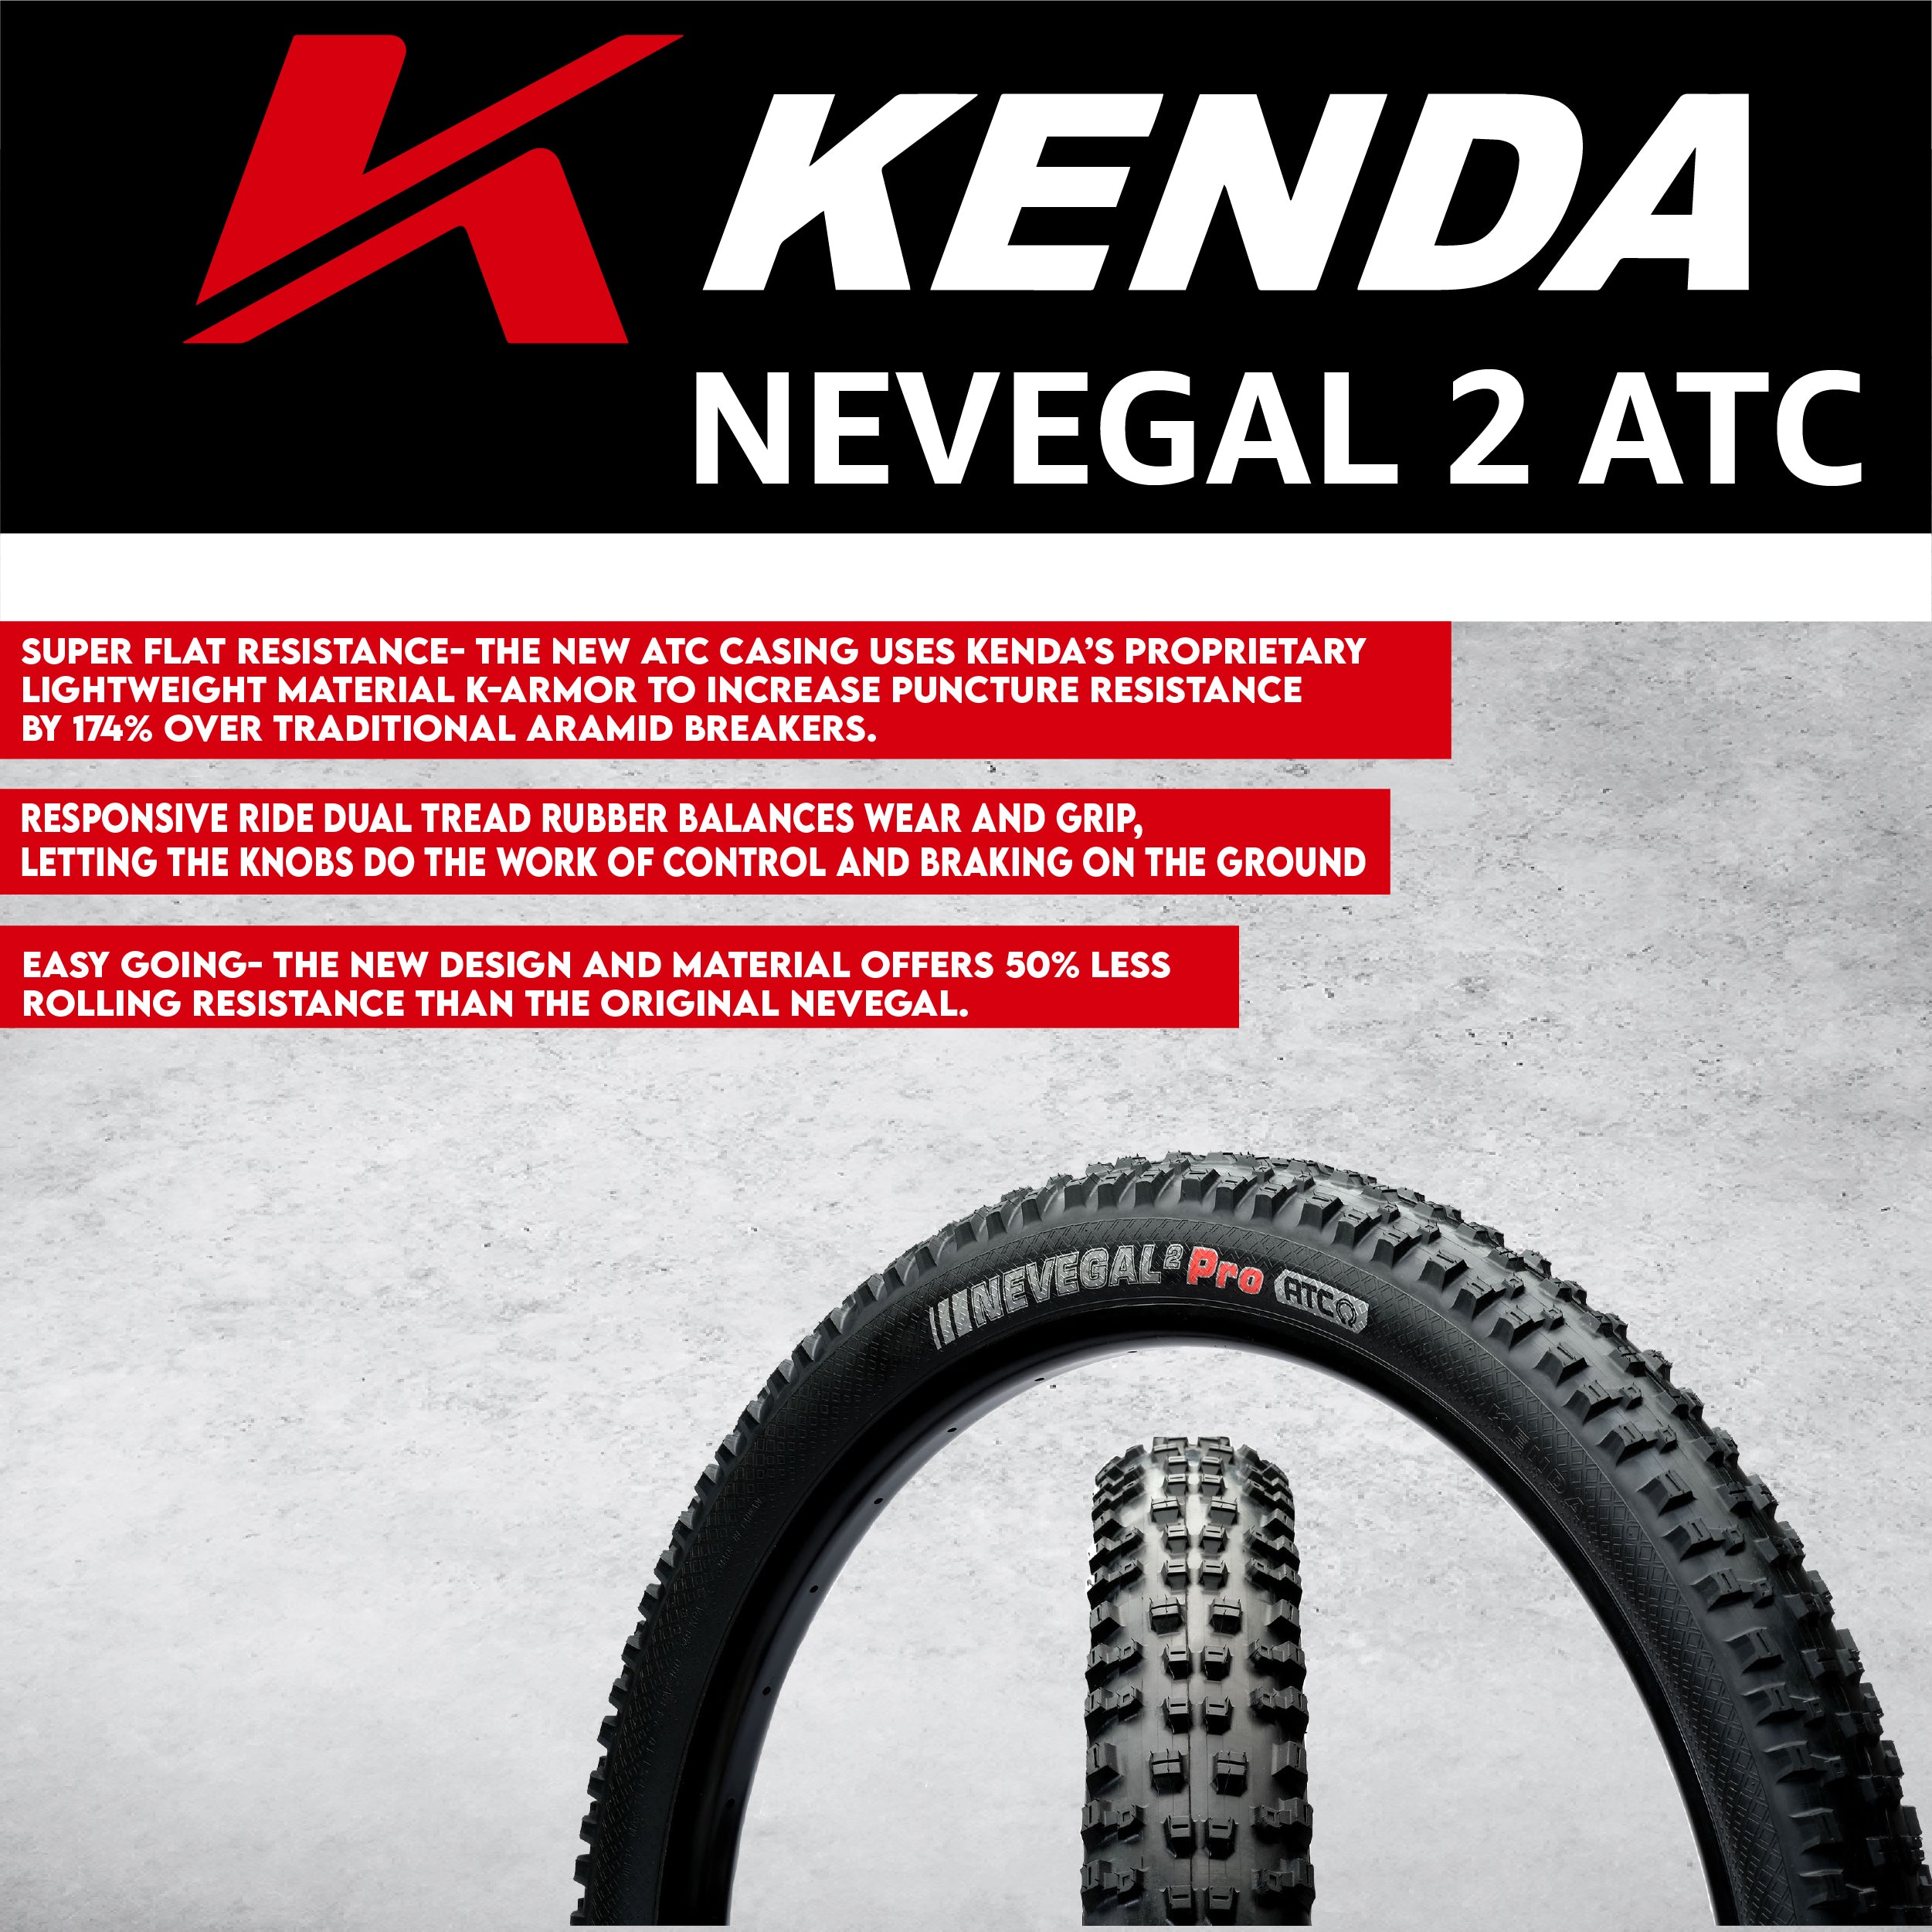 Nevegal 2 Pro ATC 120tpi Fold 27.5x2.60 27.5x2.40 Enduro Racing and Trail Bicycle Tire, Airolution 27.5x2.40-2.80  27.5x2.00-2.40 Tube w/ Bottle Opener (Two Pack)